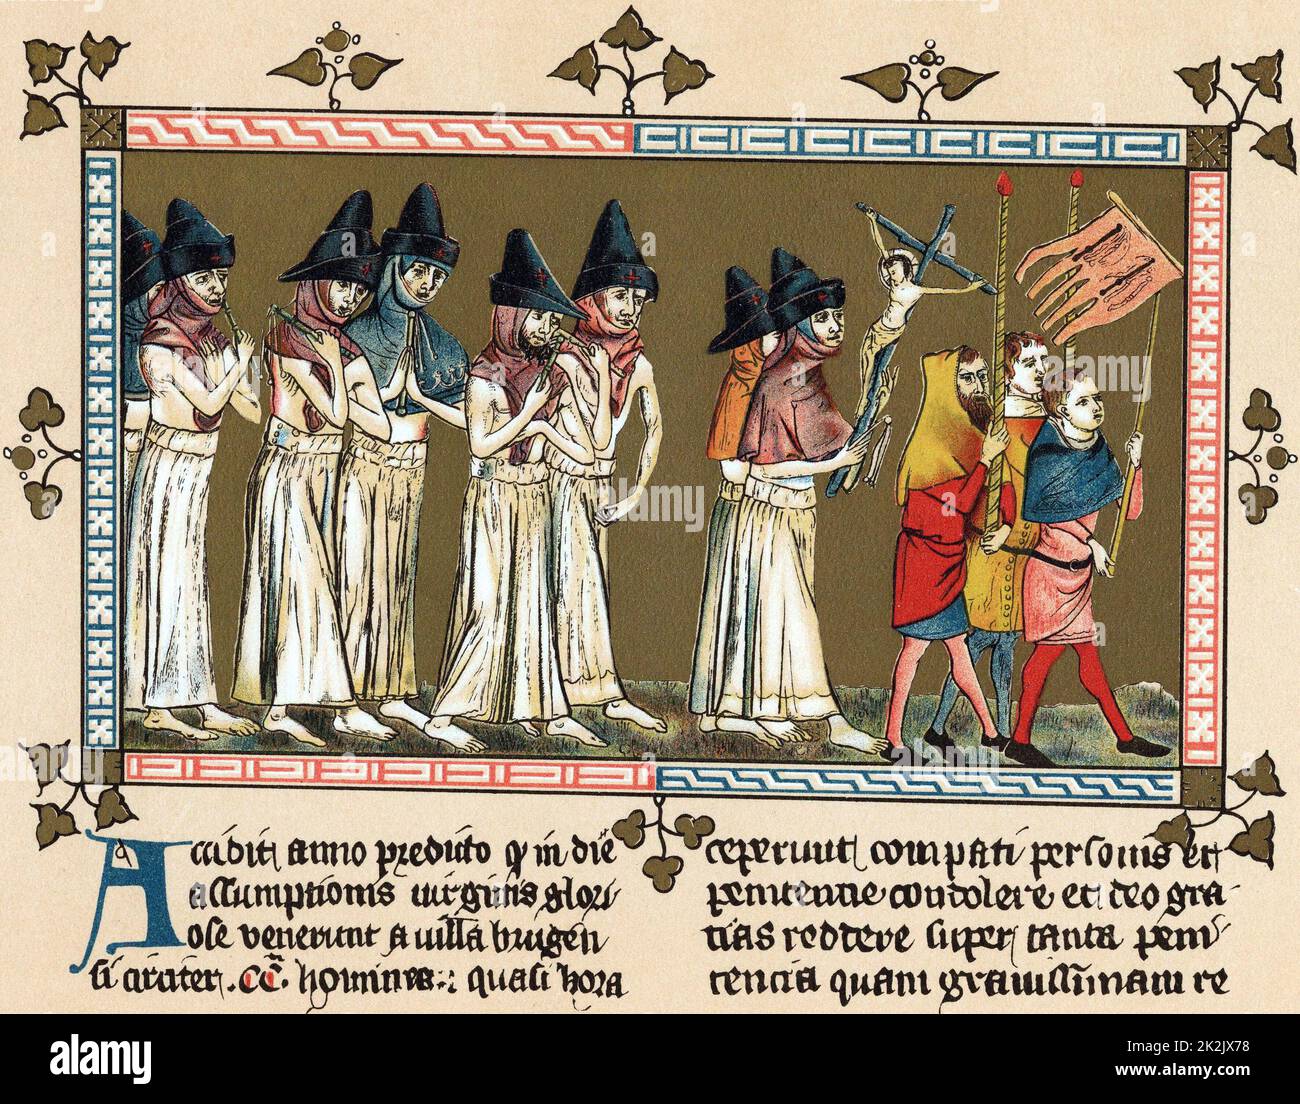 Flagellants or Brothers of the Cross in Netherlands town of Doornik 1349 scourging themselves as they walk through streets in order to free world from Black Death (Bubonic Plague). Chromolithograph after  'Chronica Aegidii Li Muisius' Stock Photo